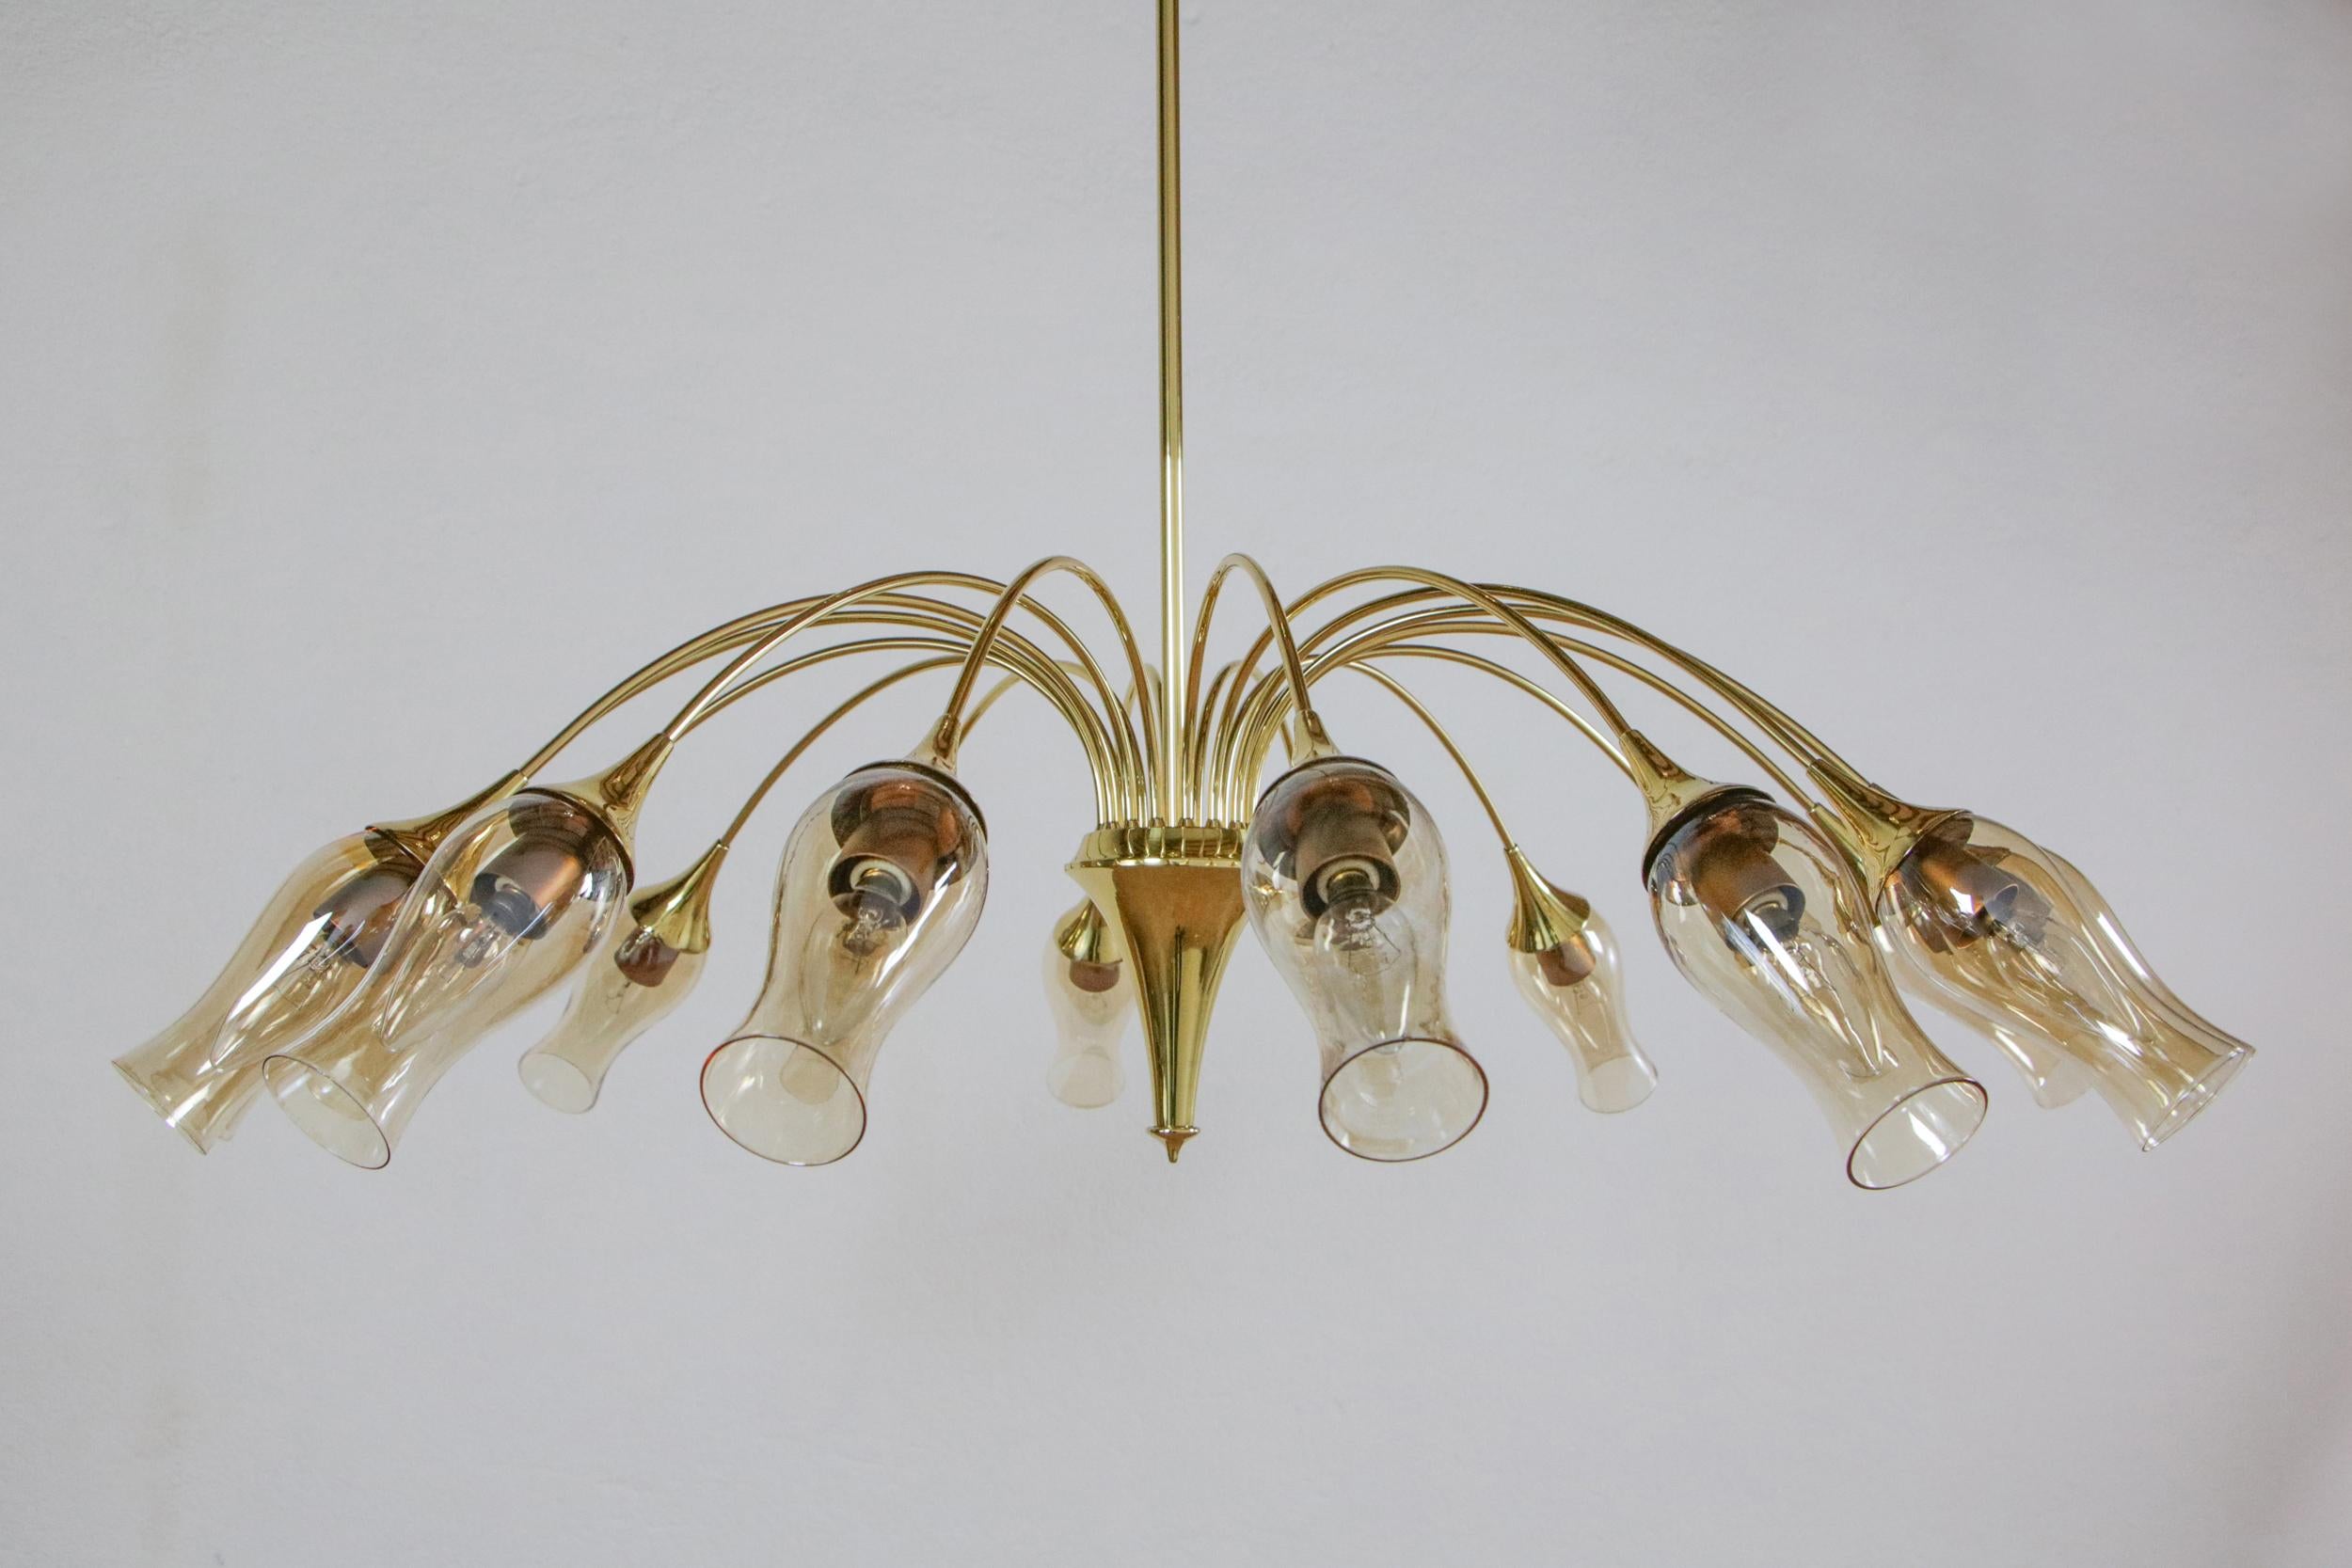 Italian Mid-Century Modern Big Spider Murano Glass Chandelier, Gold Color, 1950s For Sale 1